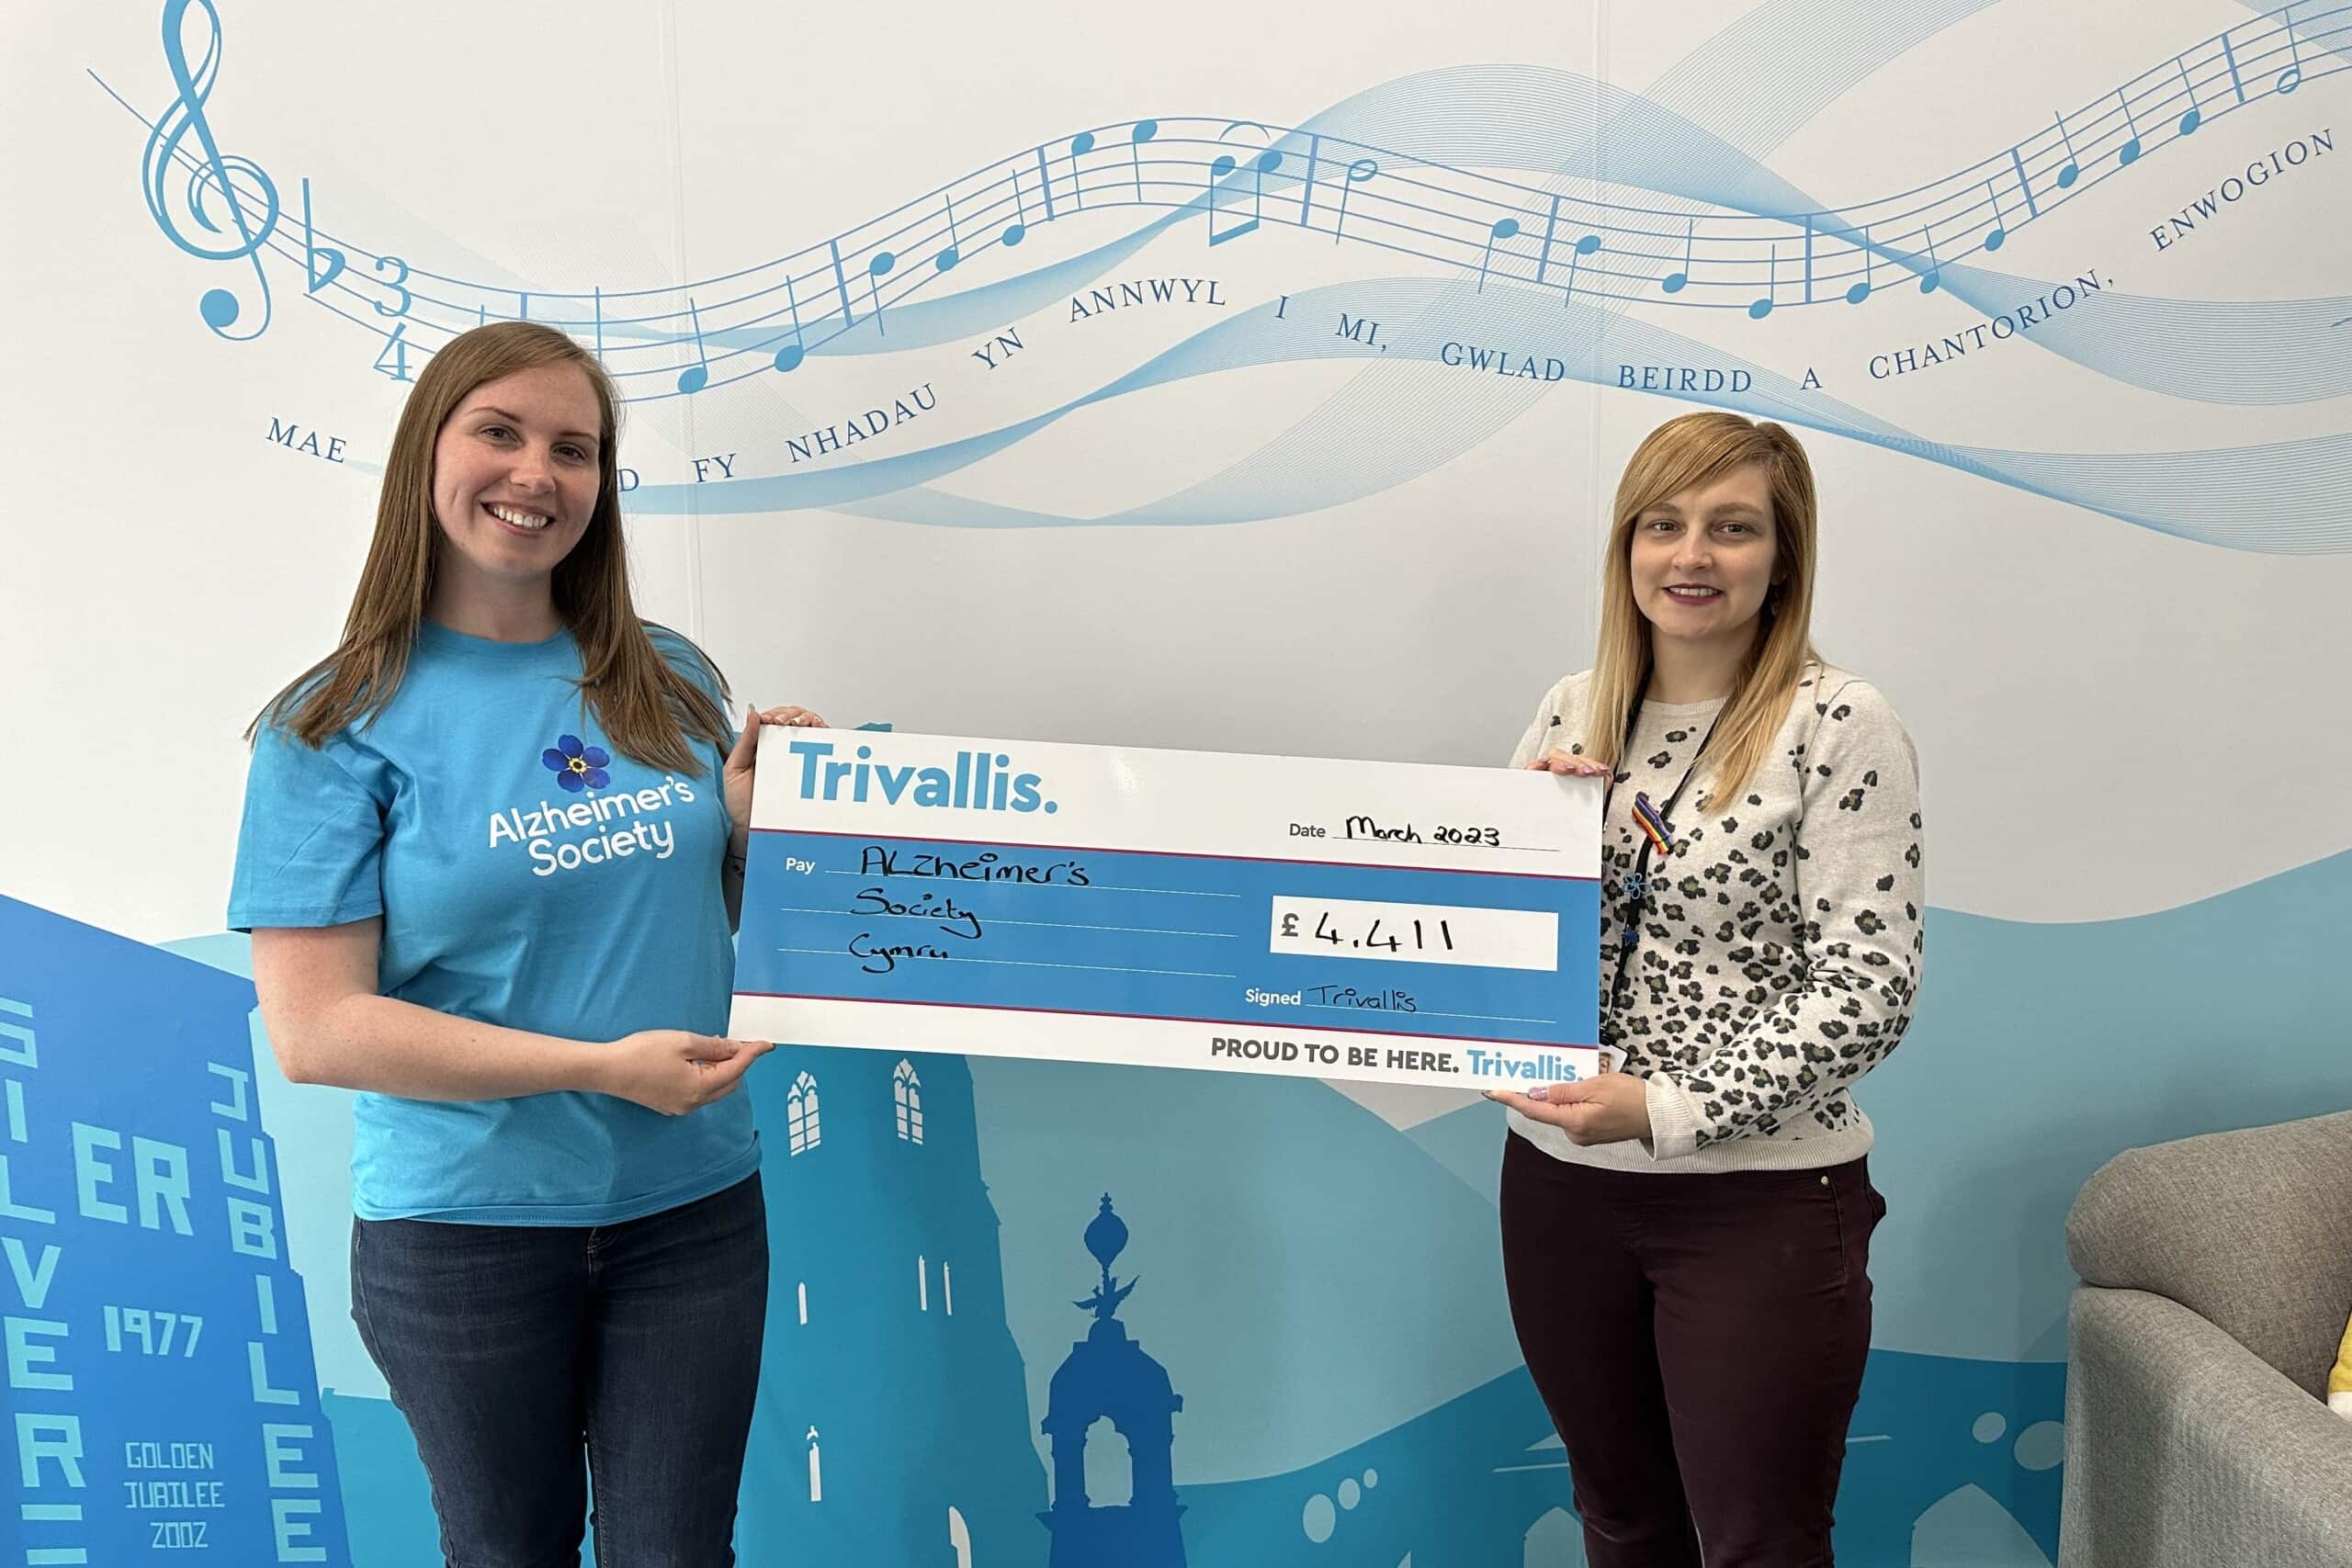 Trivallis Housing Landlord Wales Two individuals from Trivallis Community Housing proudly presenting a large charity check for £4,411 to the Alzheimer's Society.